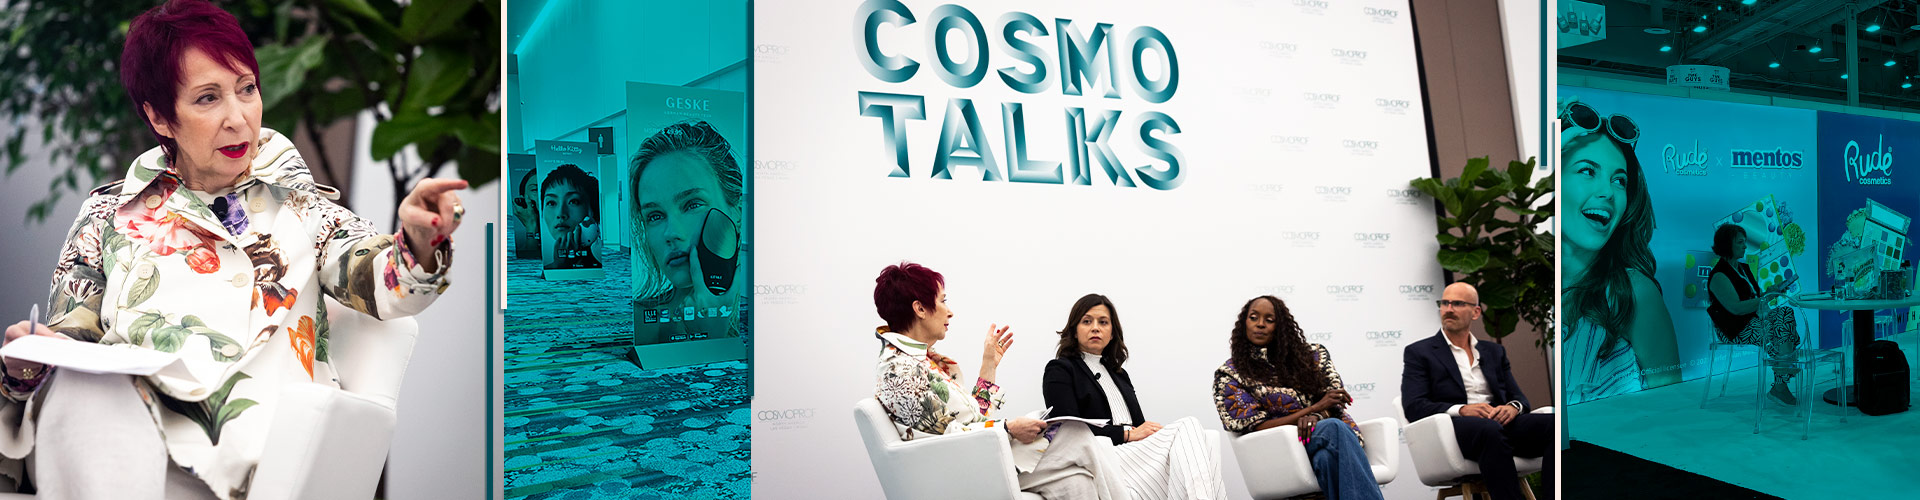 Cosmoprof NA Blog banner featuring cosmo talks panelists and booths